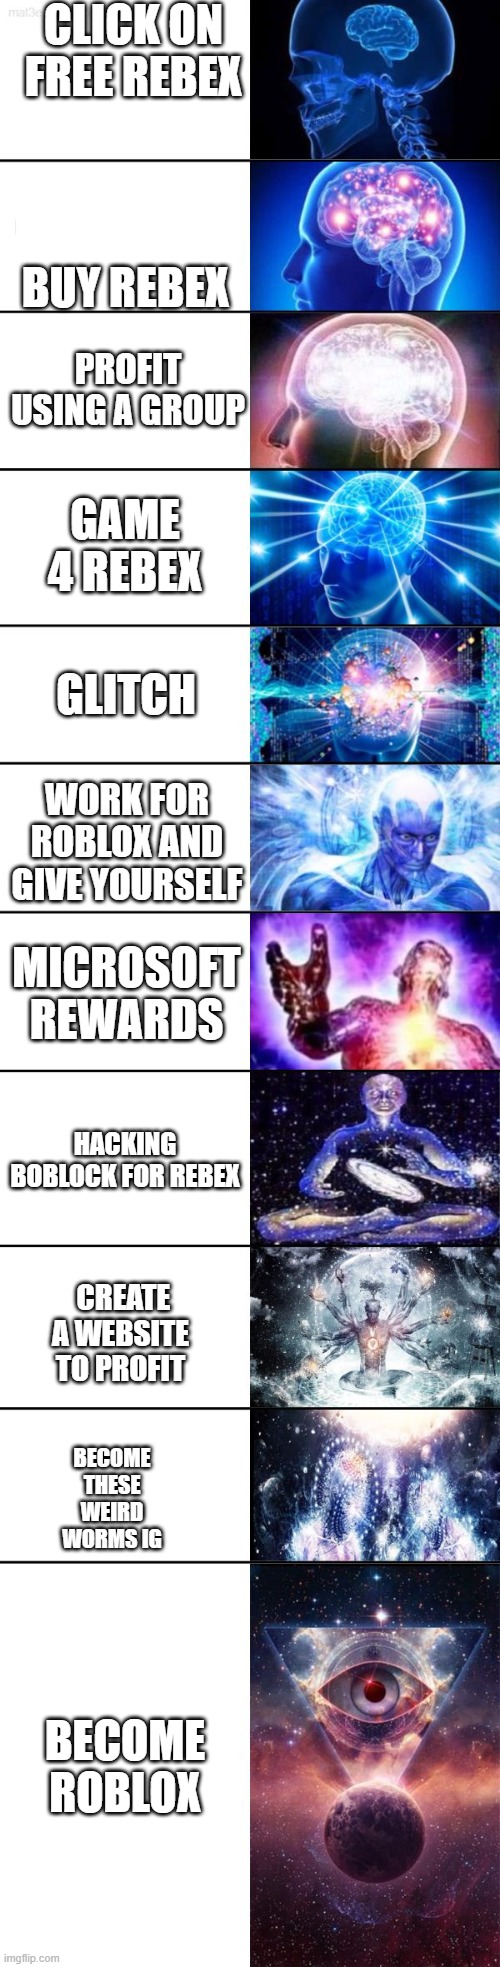 Extended Expanding Brain | CLICK ON FREE REBEX; BUY REBEX; PROFIT USING A GROUP; GAME 4 REBEX; GLITCH; WORK FOR ROBLOX AND GIVE YOURSELF; MICROSOFT REWARDS; HACKING BOBLOCK FOR REBEX; CREATE A WEBSITE TO PROFIT; BECOME THESE WEIRD WORMS IG; BECOME ROBLOX | image tagged in extended expanding brain | made w/ Imgflip meme maker